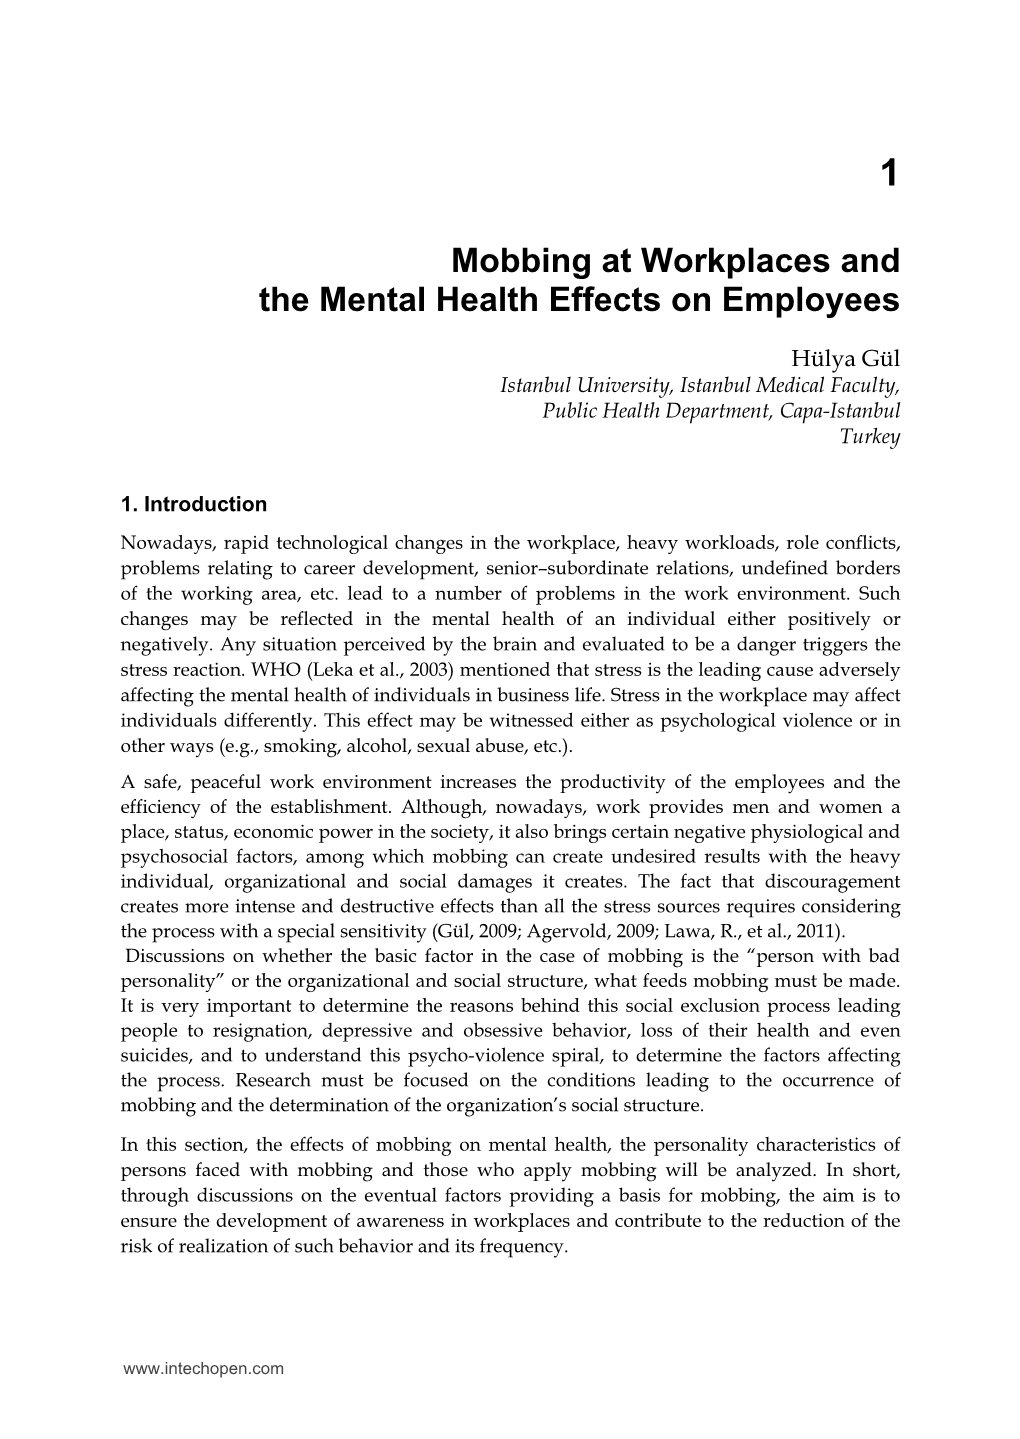 Mobbing at Workplaces and the Mental Health Effects on Employees